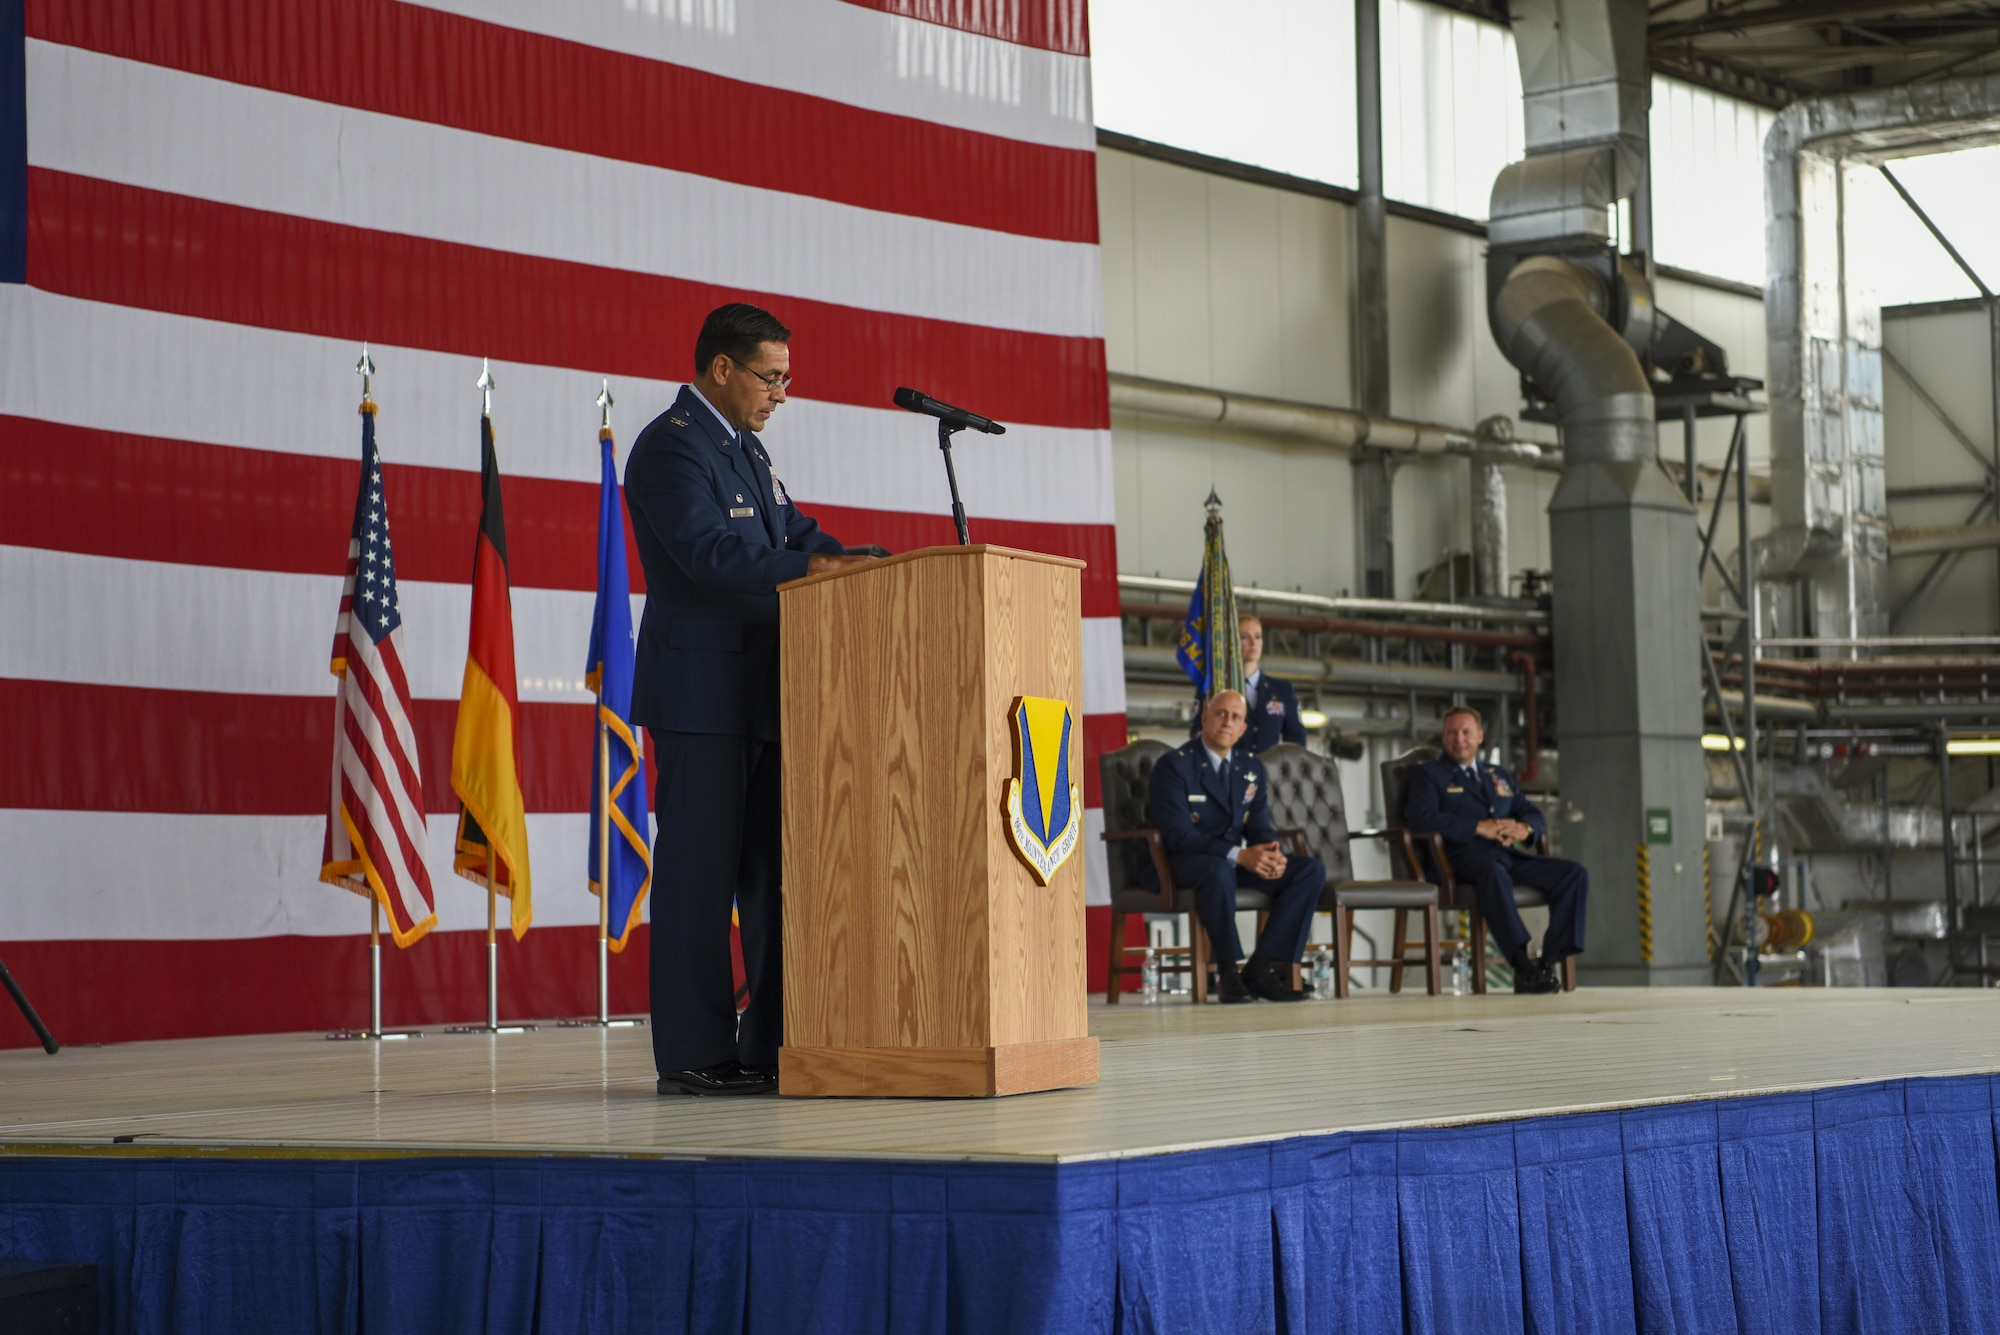 U.S. Air Force Col. Robert B. Blake, 86th Maintenance Group incoming commander, gives a speech during the 86 MXG change of command ceremony at Ramstein Air Base, Germany, July 13, 2022.